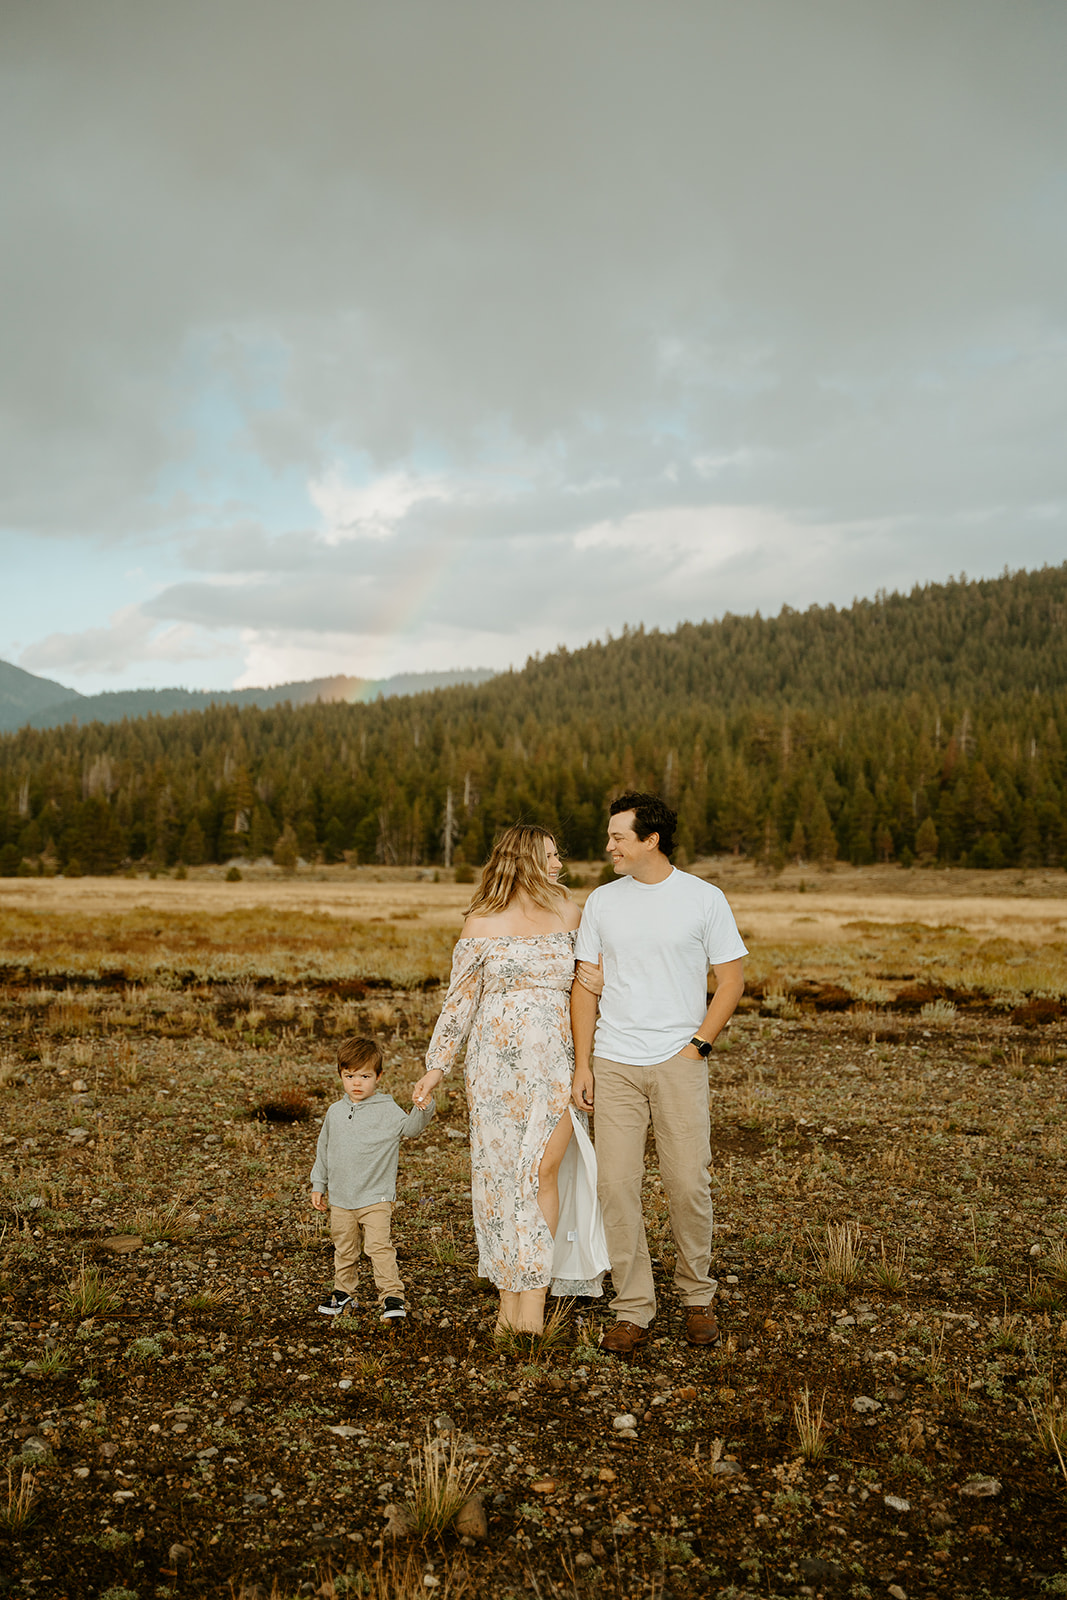 A family walking through a field for during fall after a swift rainstorm for their maternity photos in Hope Valley, CA.